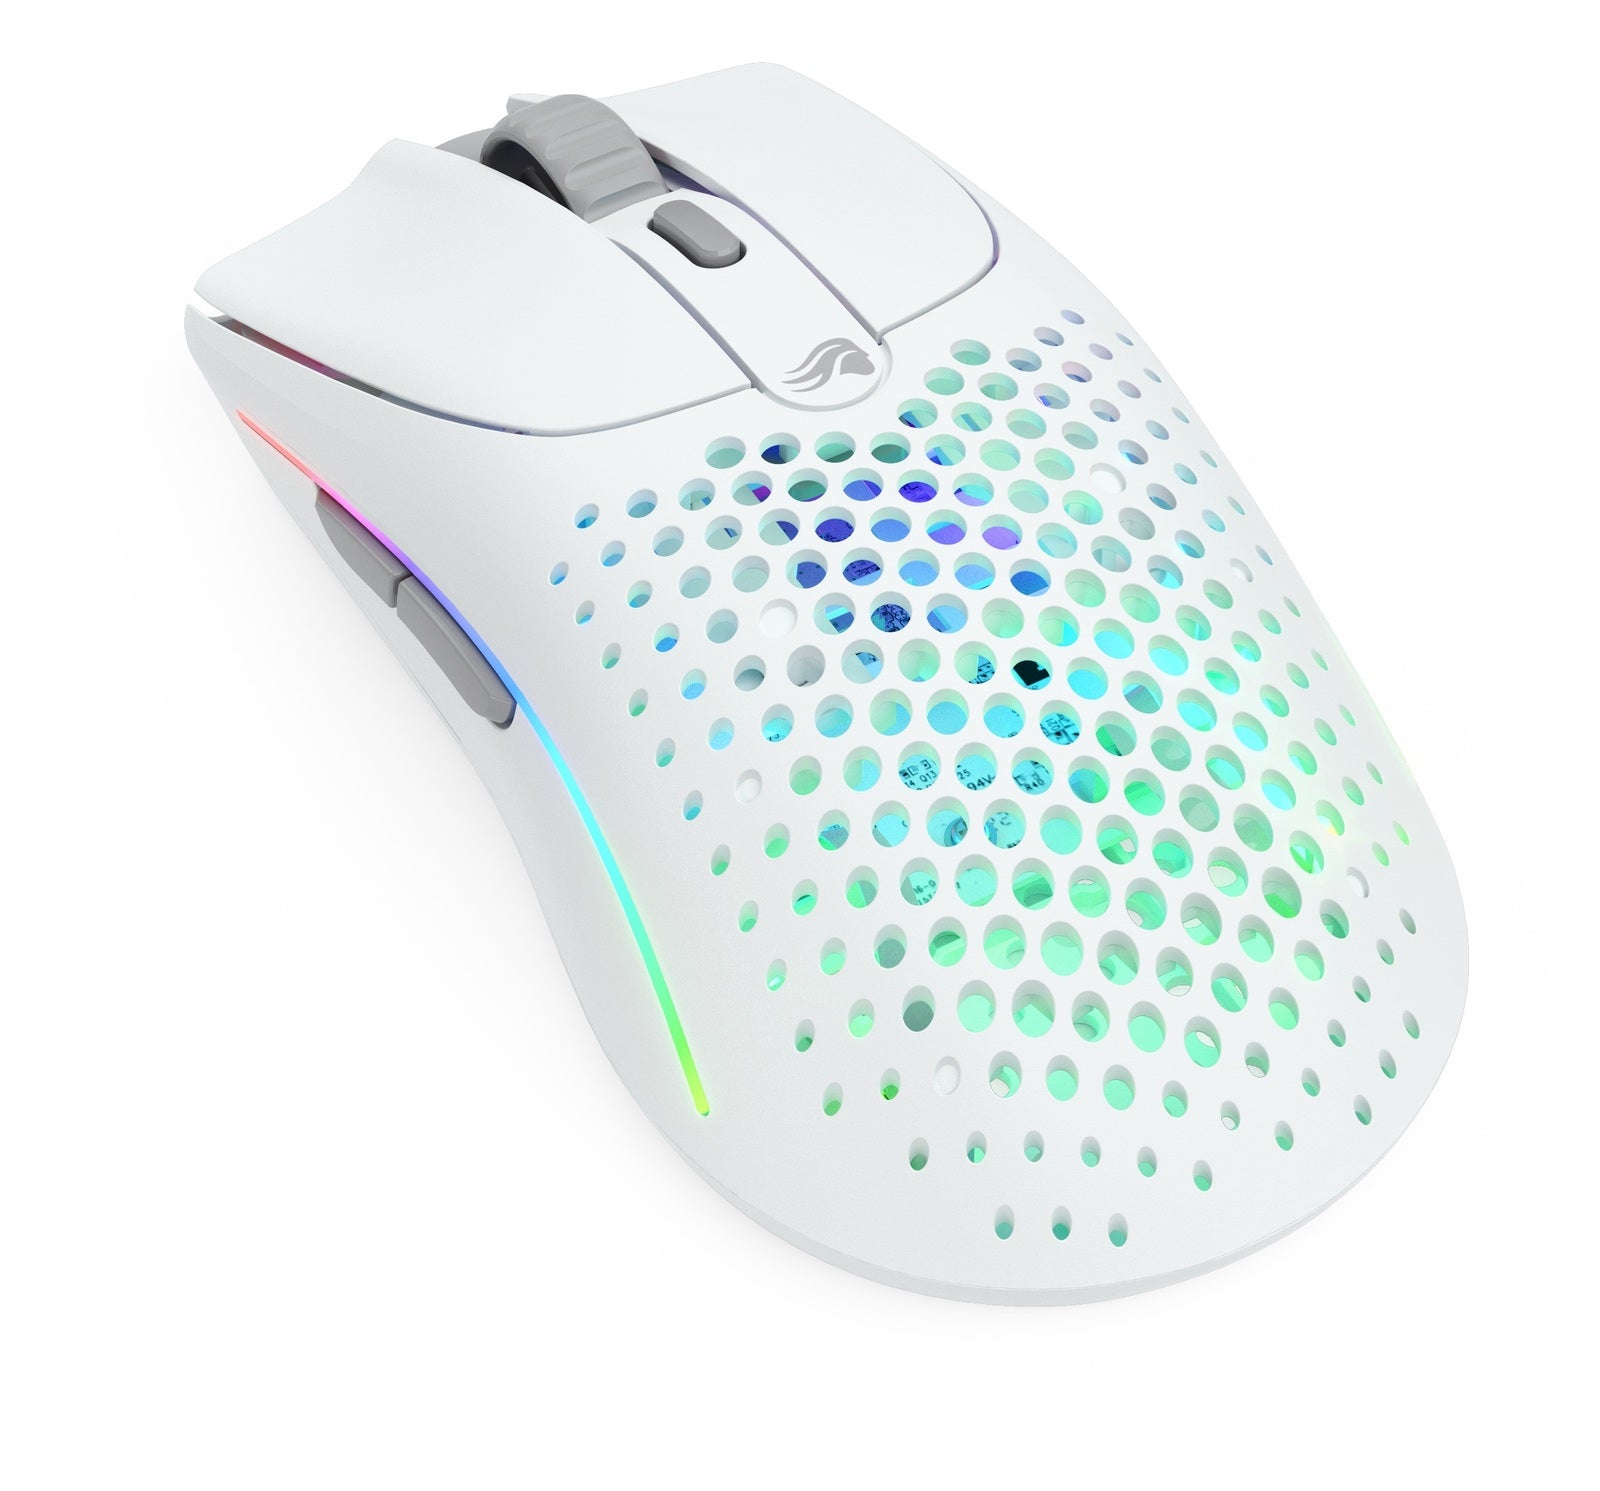 Glorious PC Gaming Model O 2 Wireless Mouse (White) - PC Games